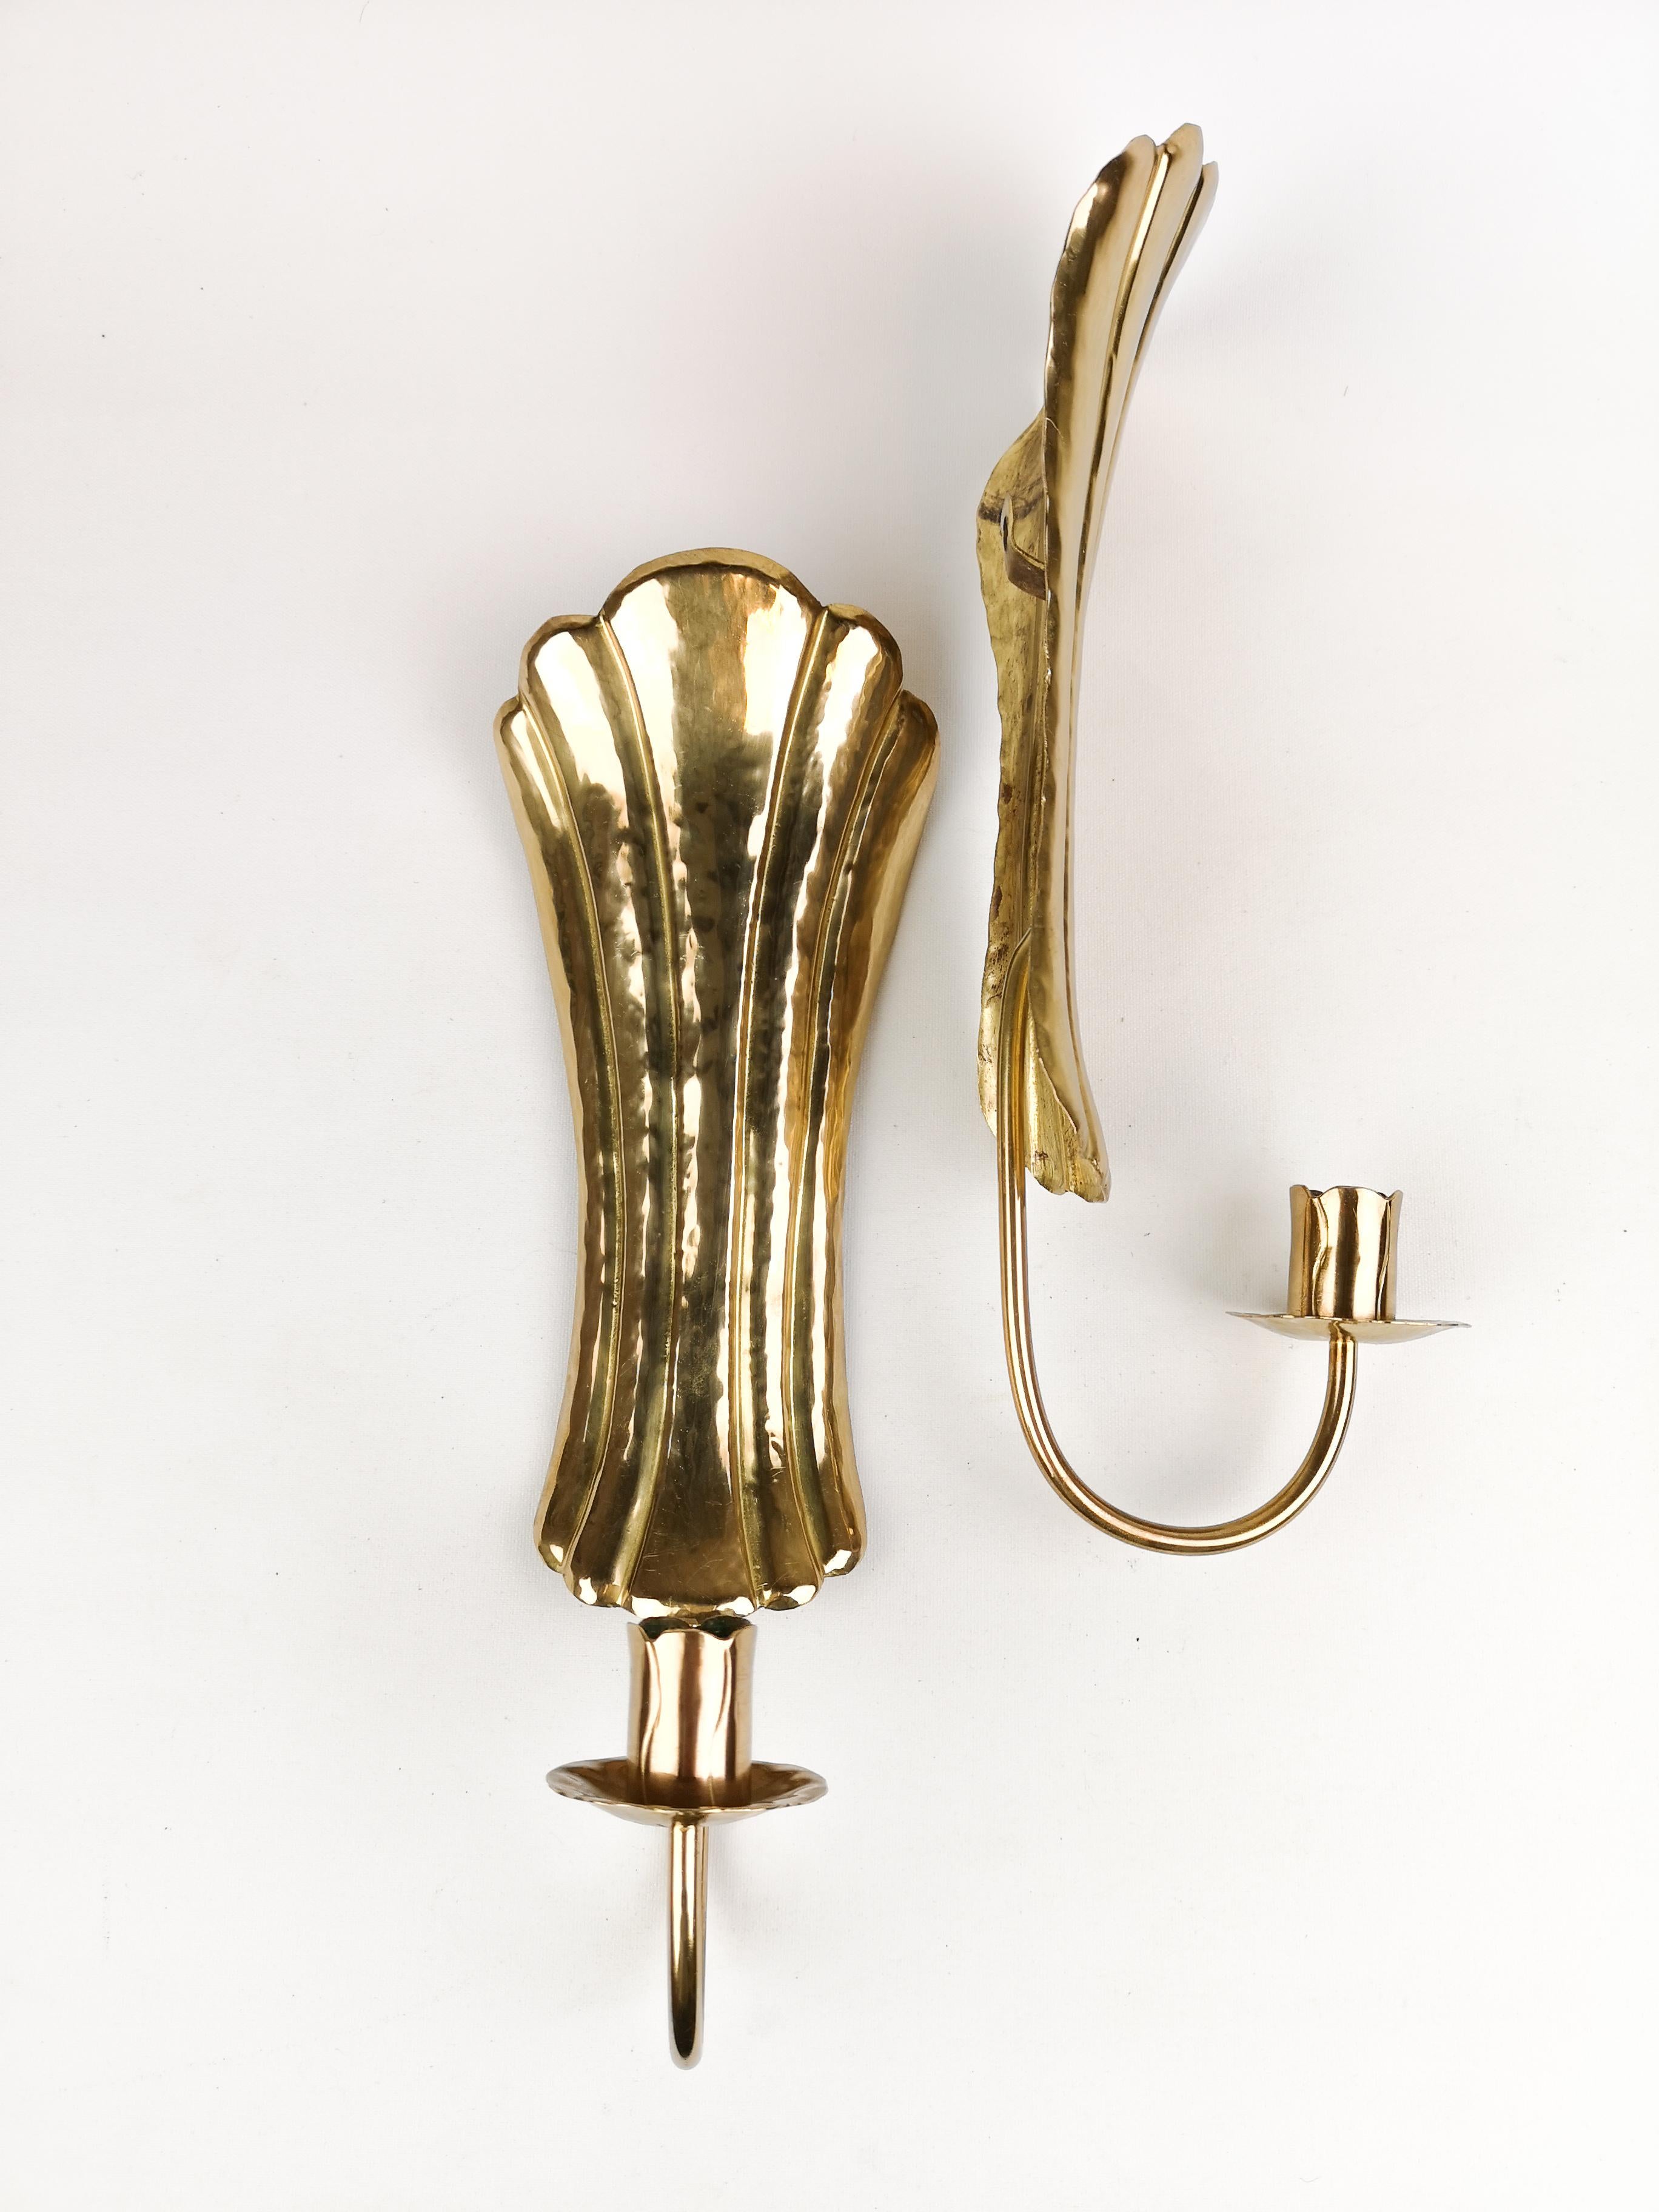 Midcentury Pair of Brass Wall Candlesticks, Sweden, 1960s For Sale 3